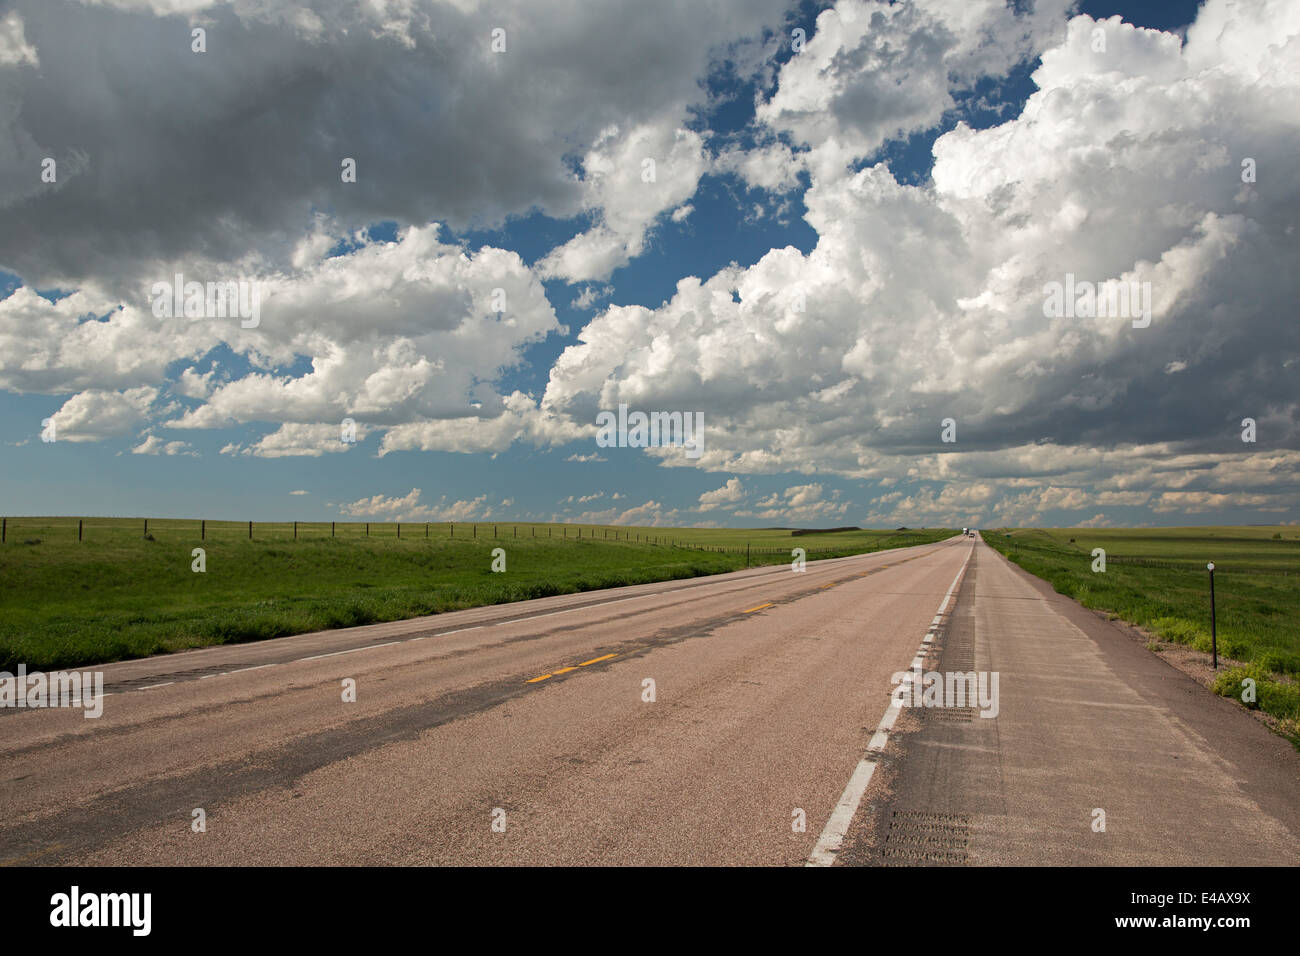 Newcastle, Wyoming - US Highway 85 nell est del Wyoming praterie. Foto Stock